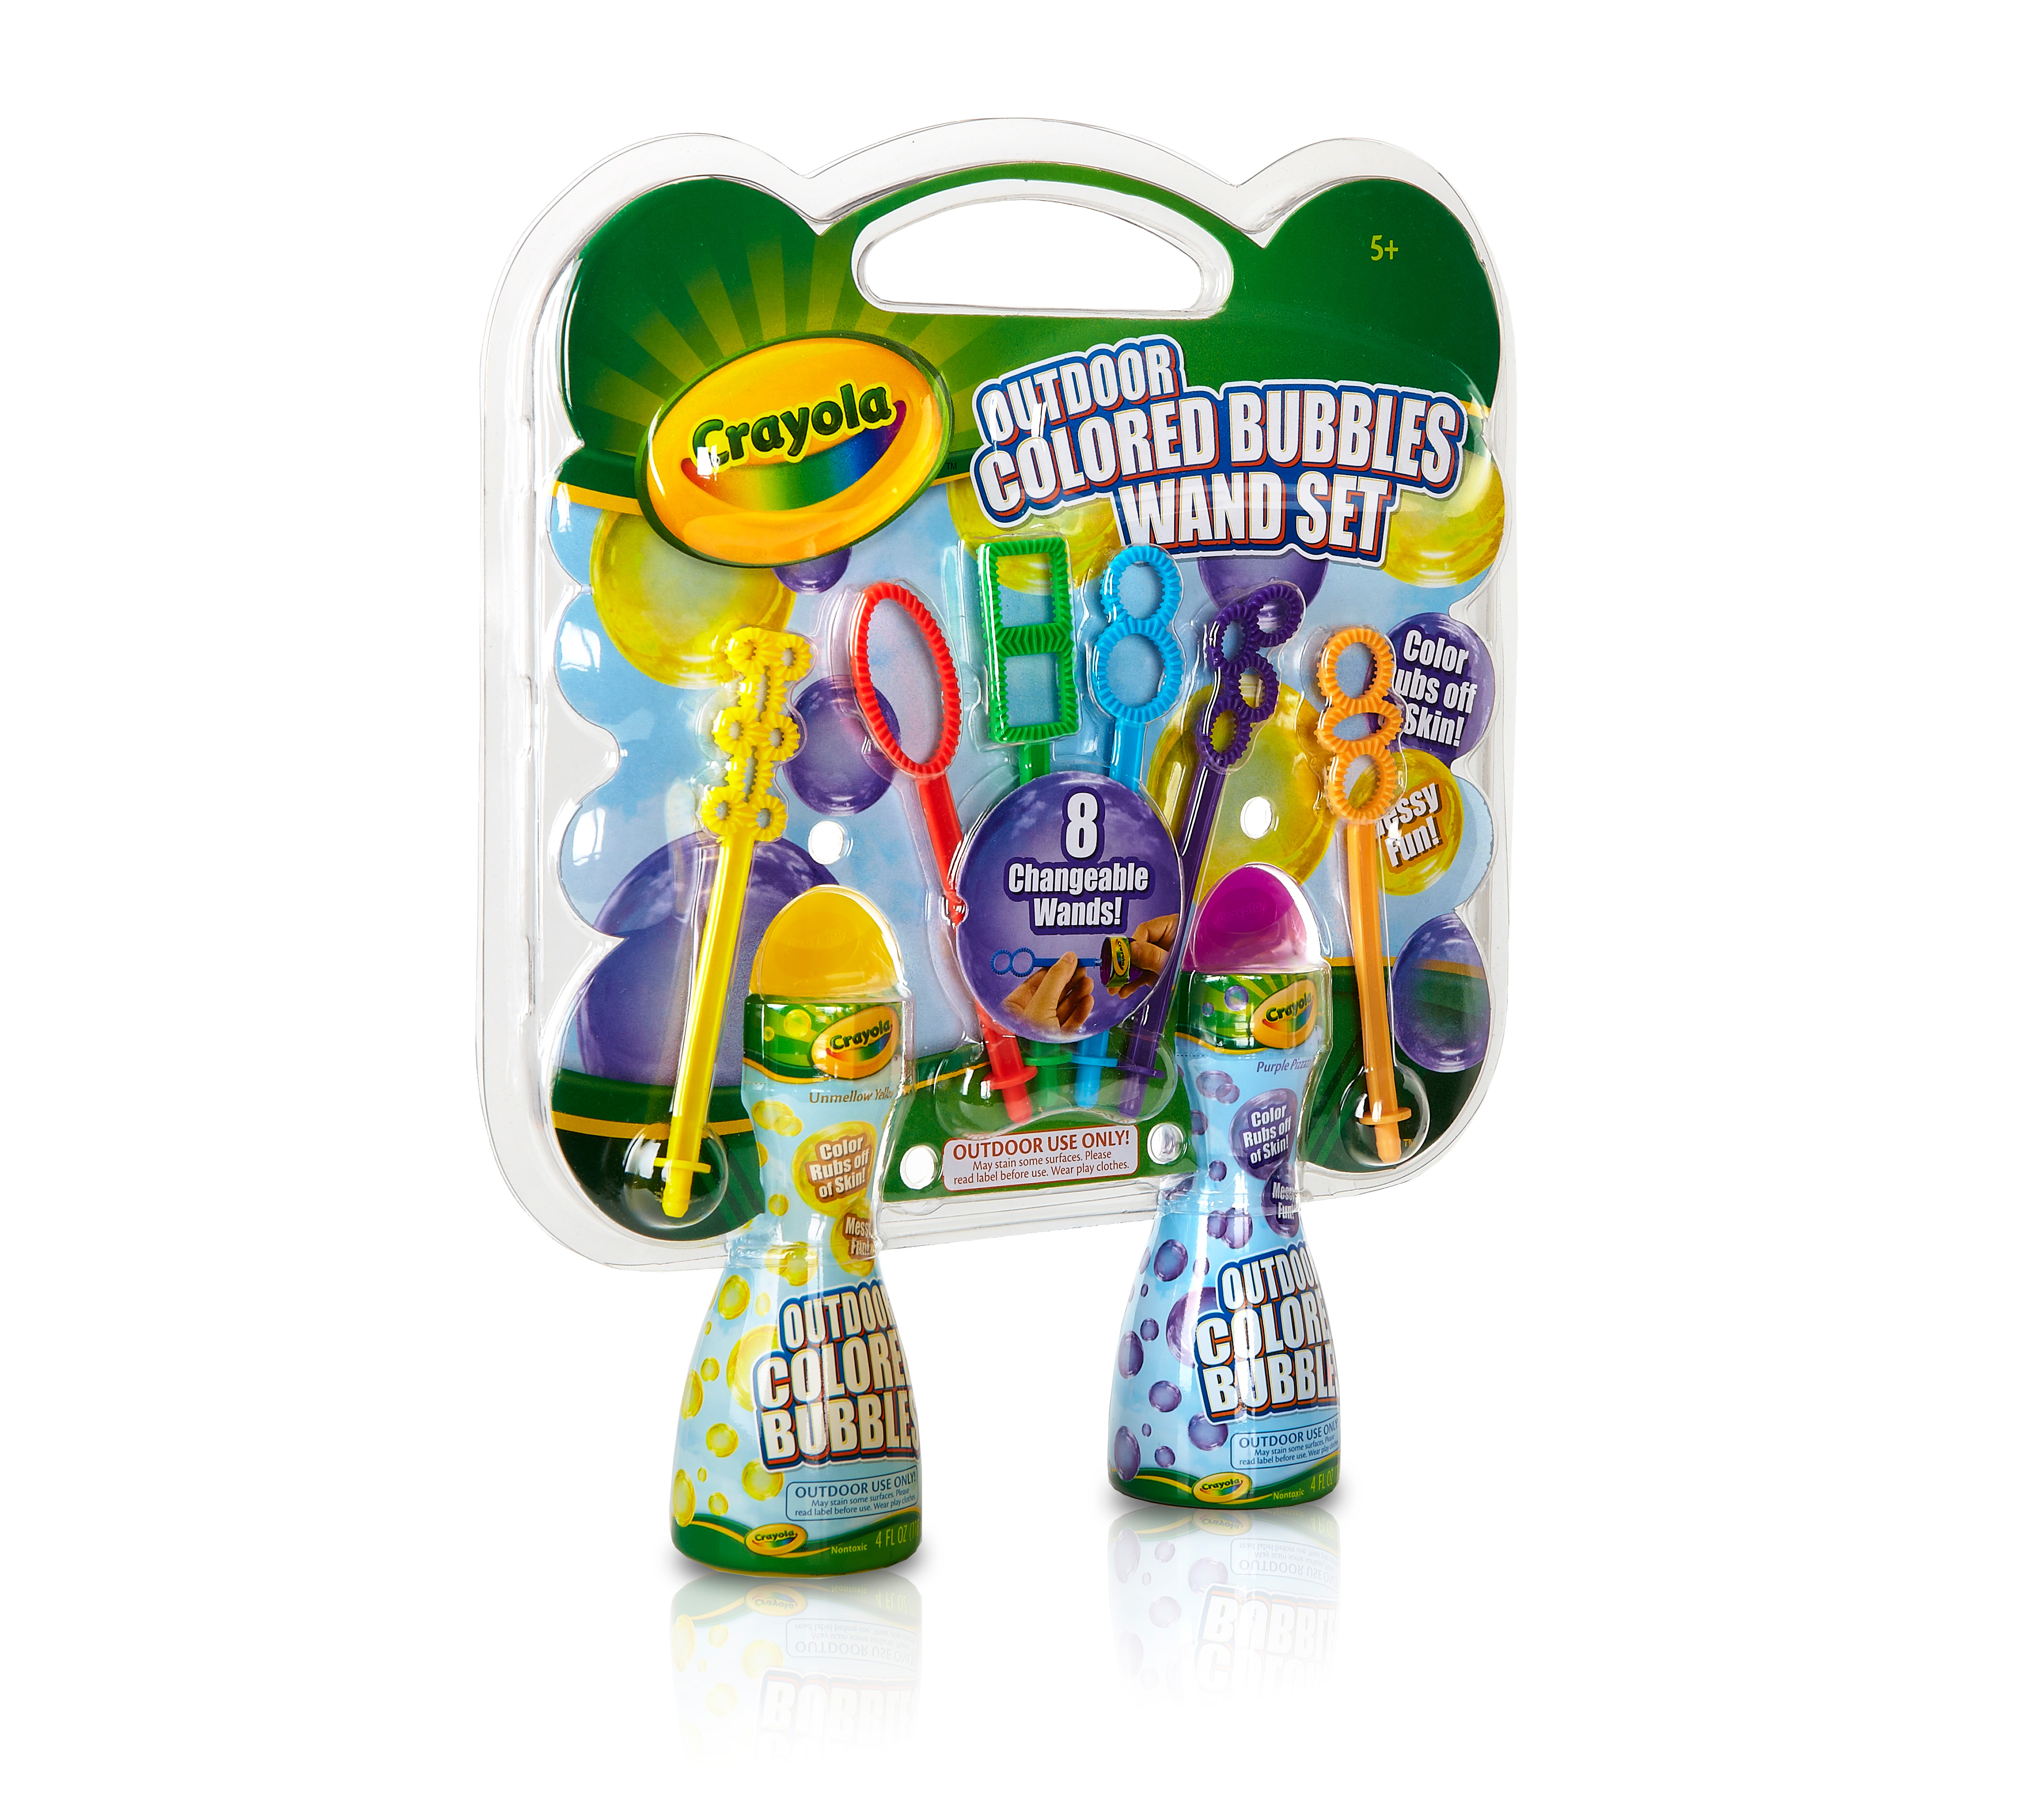 Download Colored Bubble Wand Set | Crayola